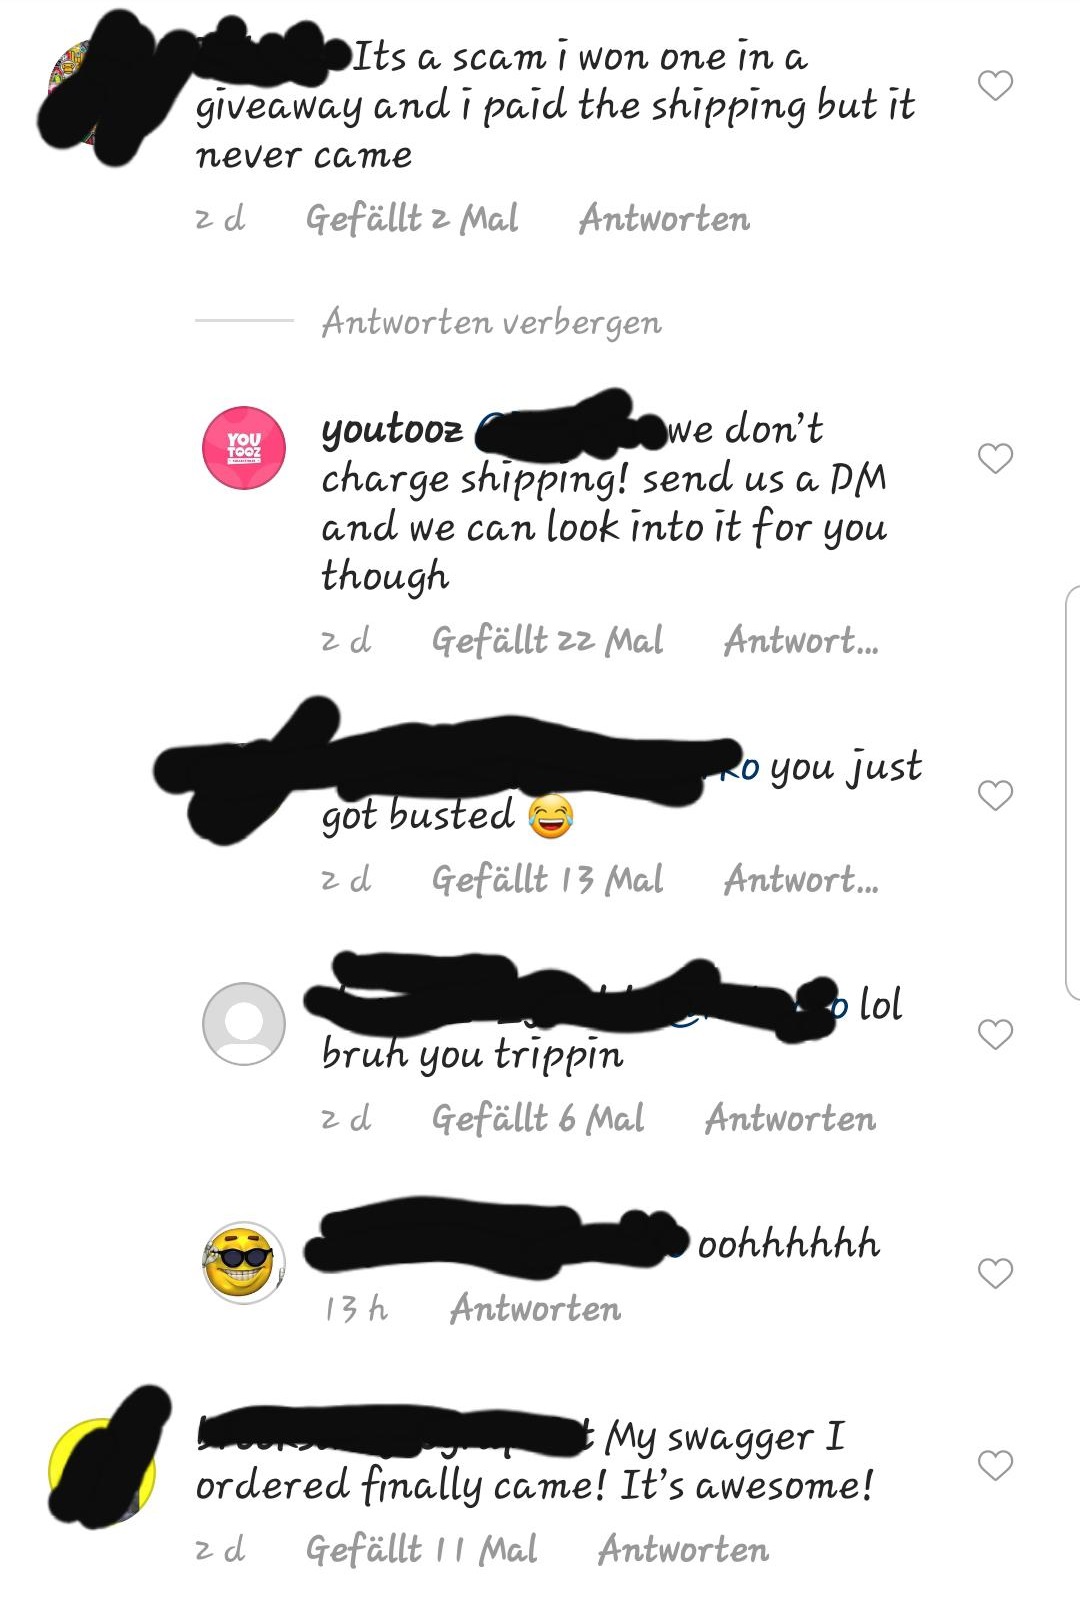 design - v Its a scam i won one in a giveaway and i paid the shipping but it never came zd Gefllt z Mal Antworten Antworten verbergen You Too youtooz bowe don't charge shipping! send us a Dm and we can look into it for you though zd Gefllt zz Mal Antwort.